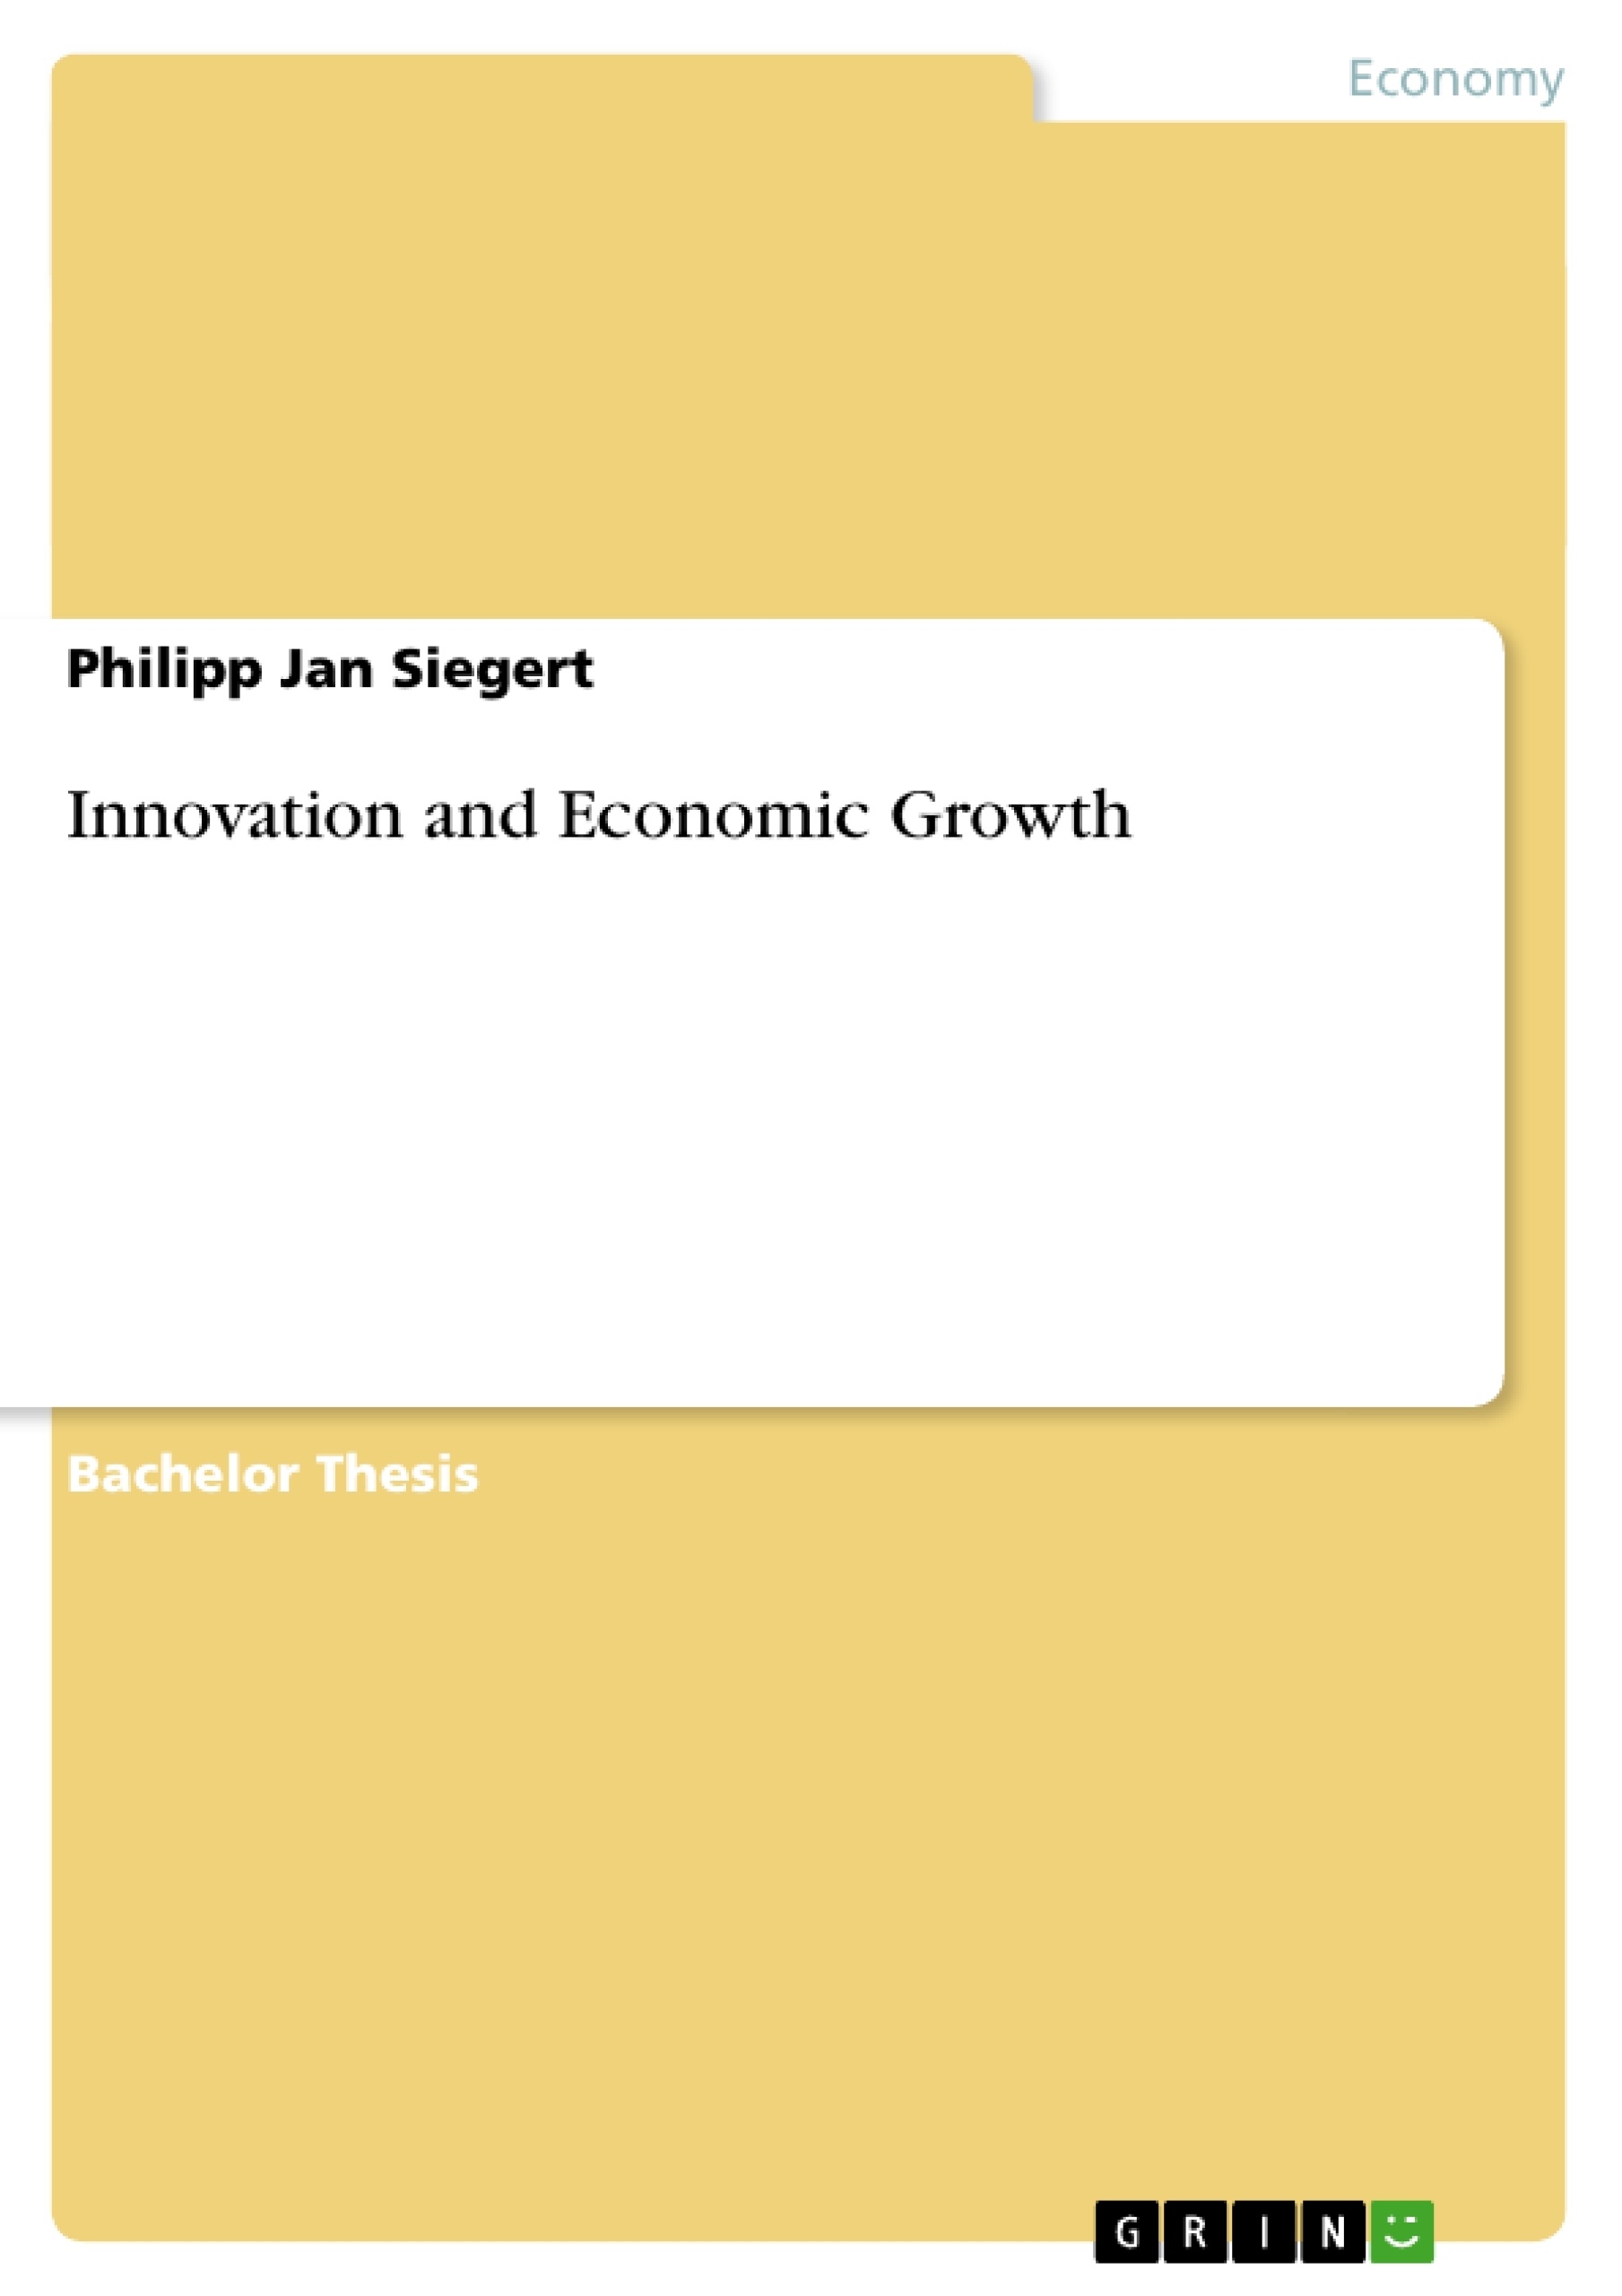 Title: Innovation and Economic Growth